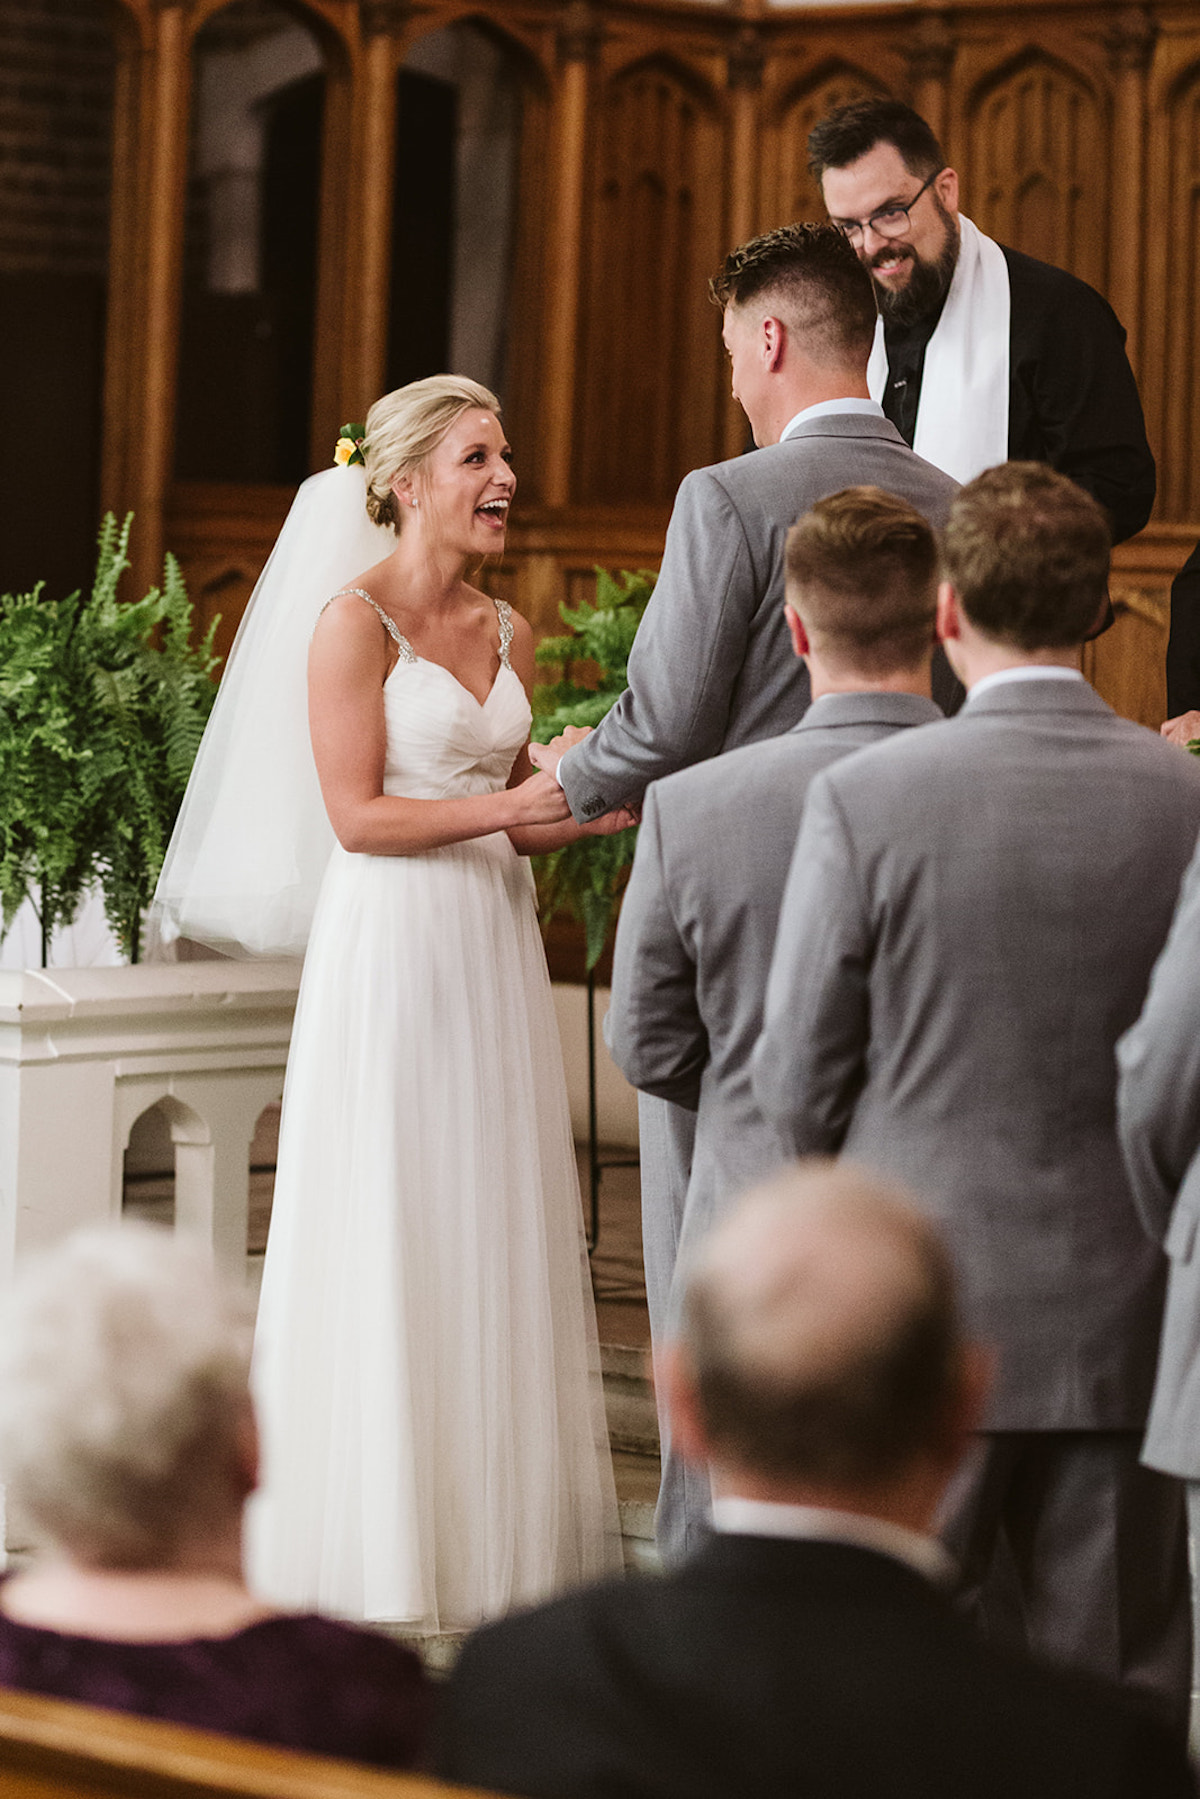 Bride shares vows during wedding ceremony